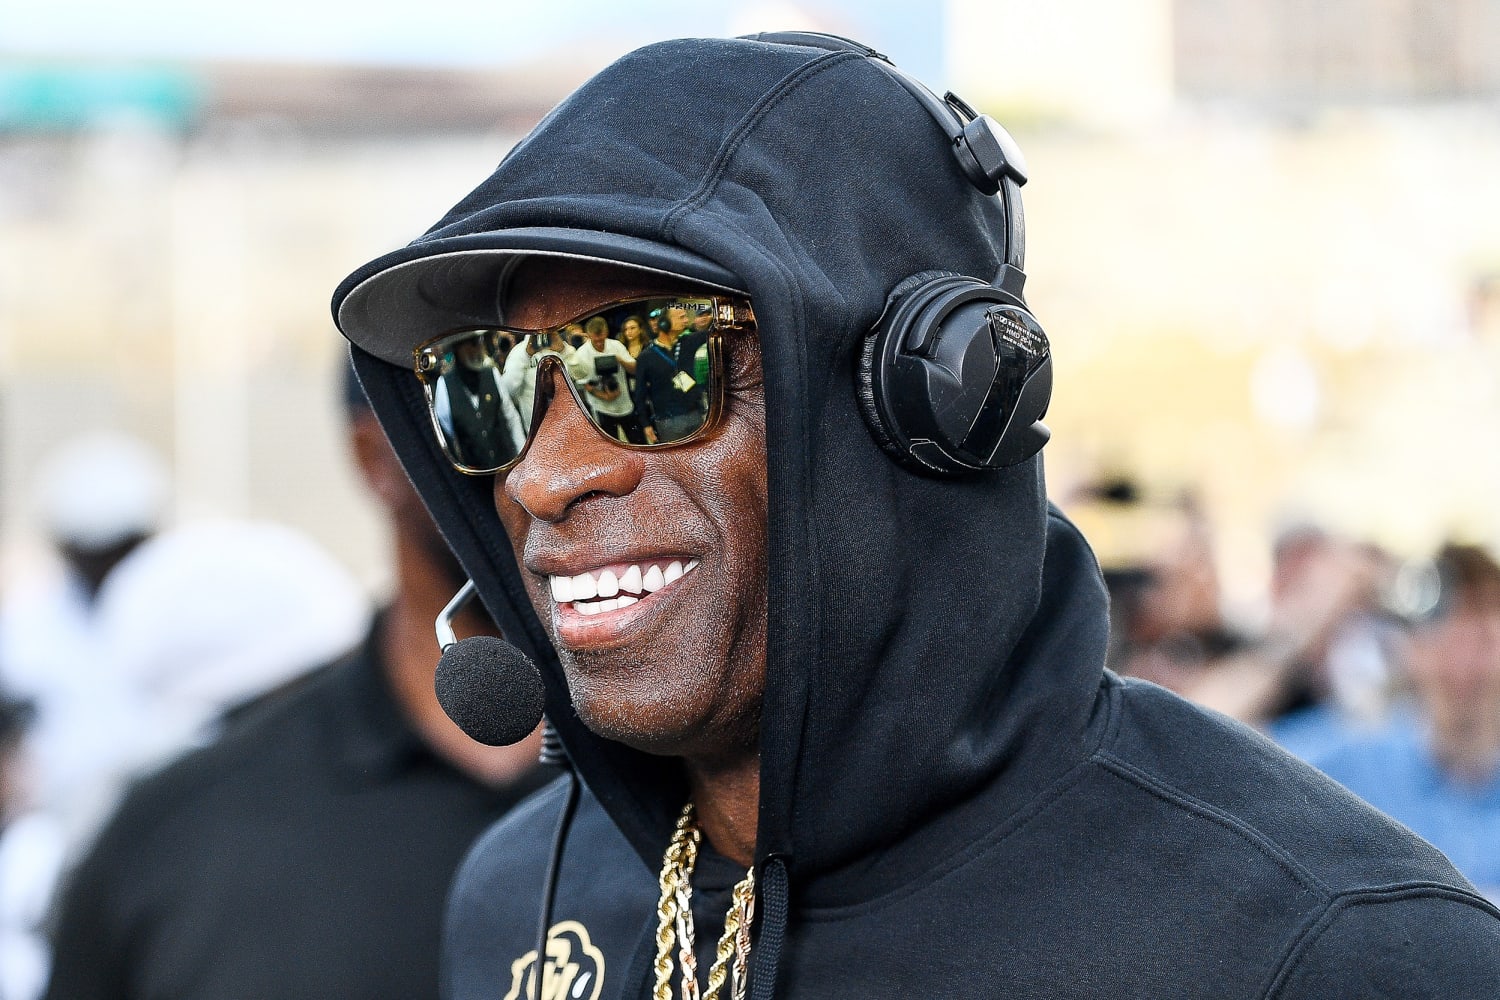 Why Deion Sanders' success in Colorado matters so much to Black fans